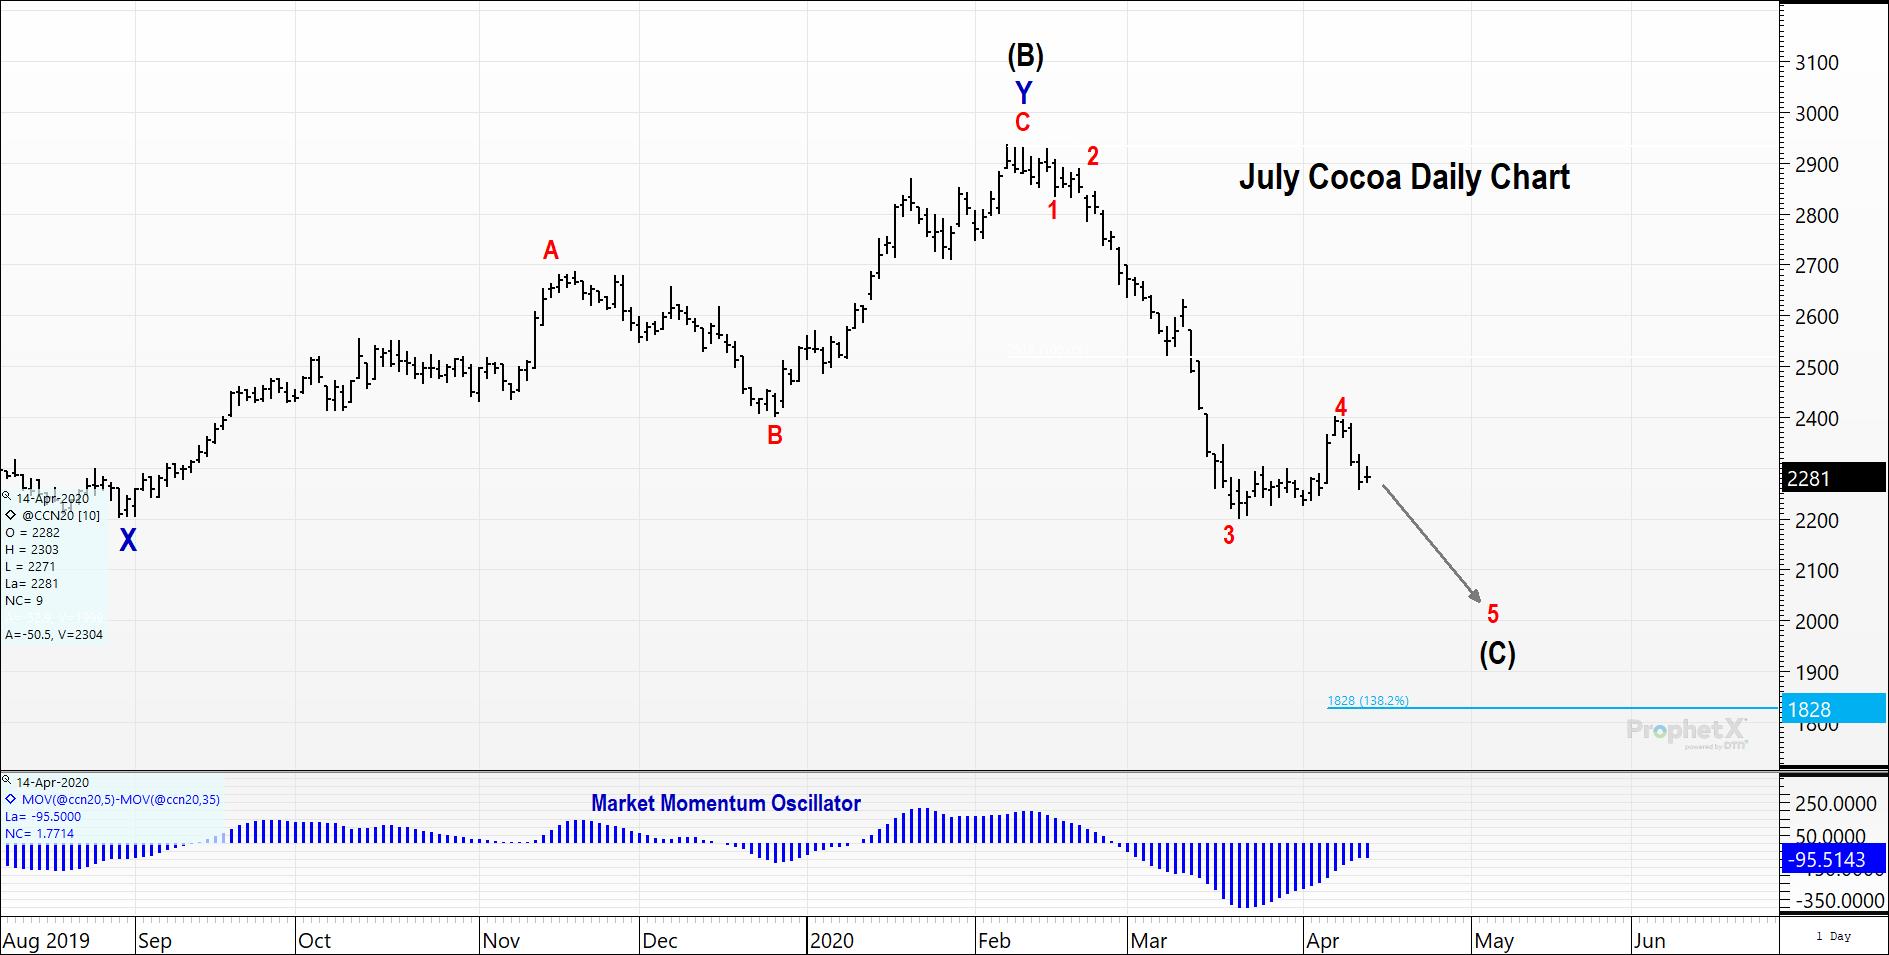 July Cocoa Daily Futures